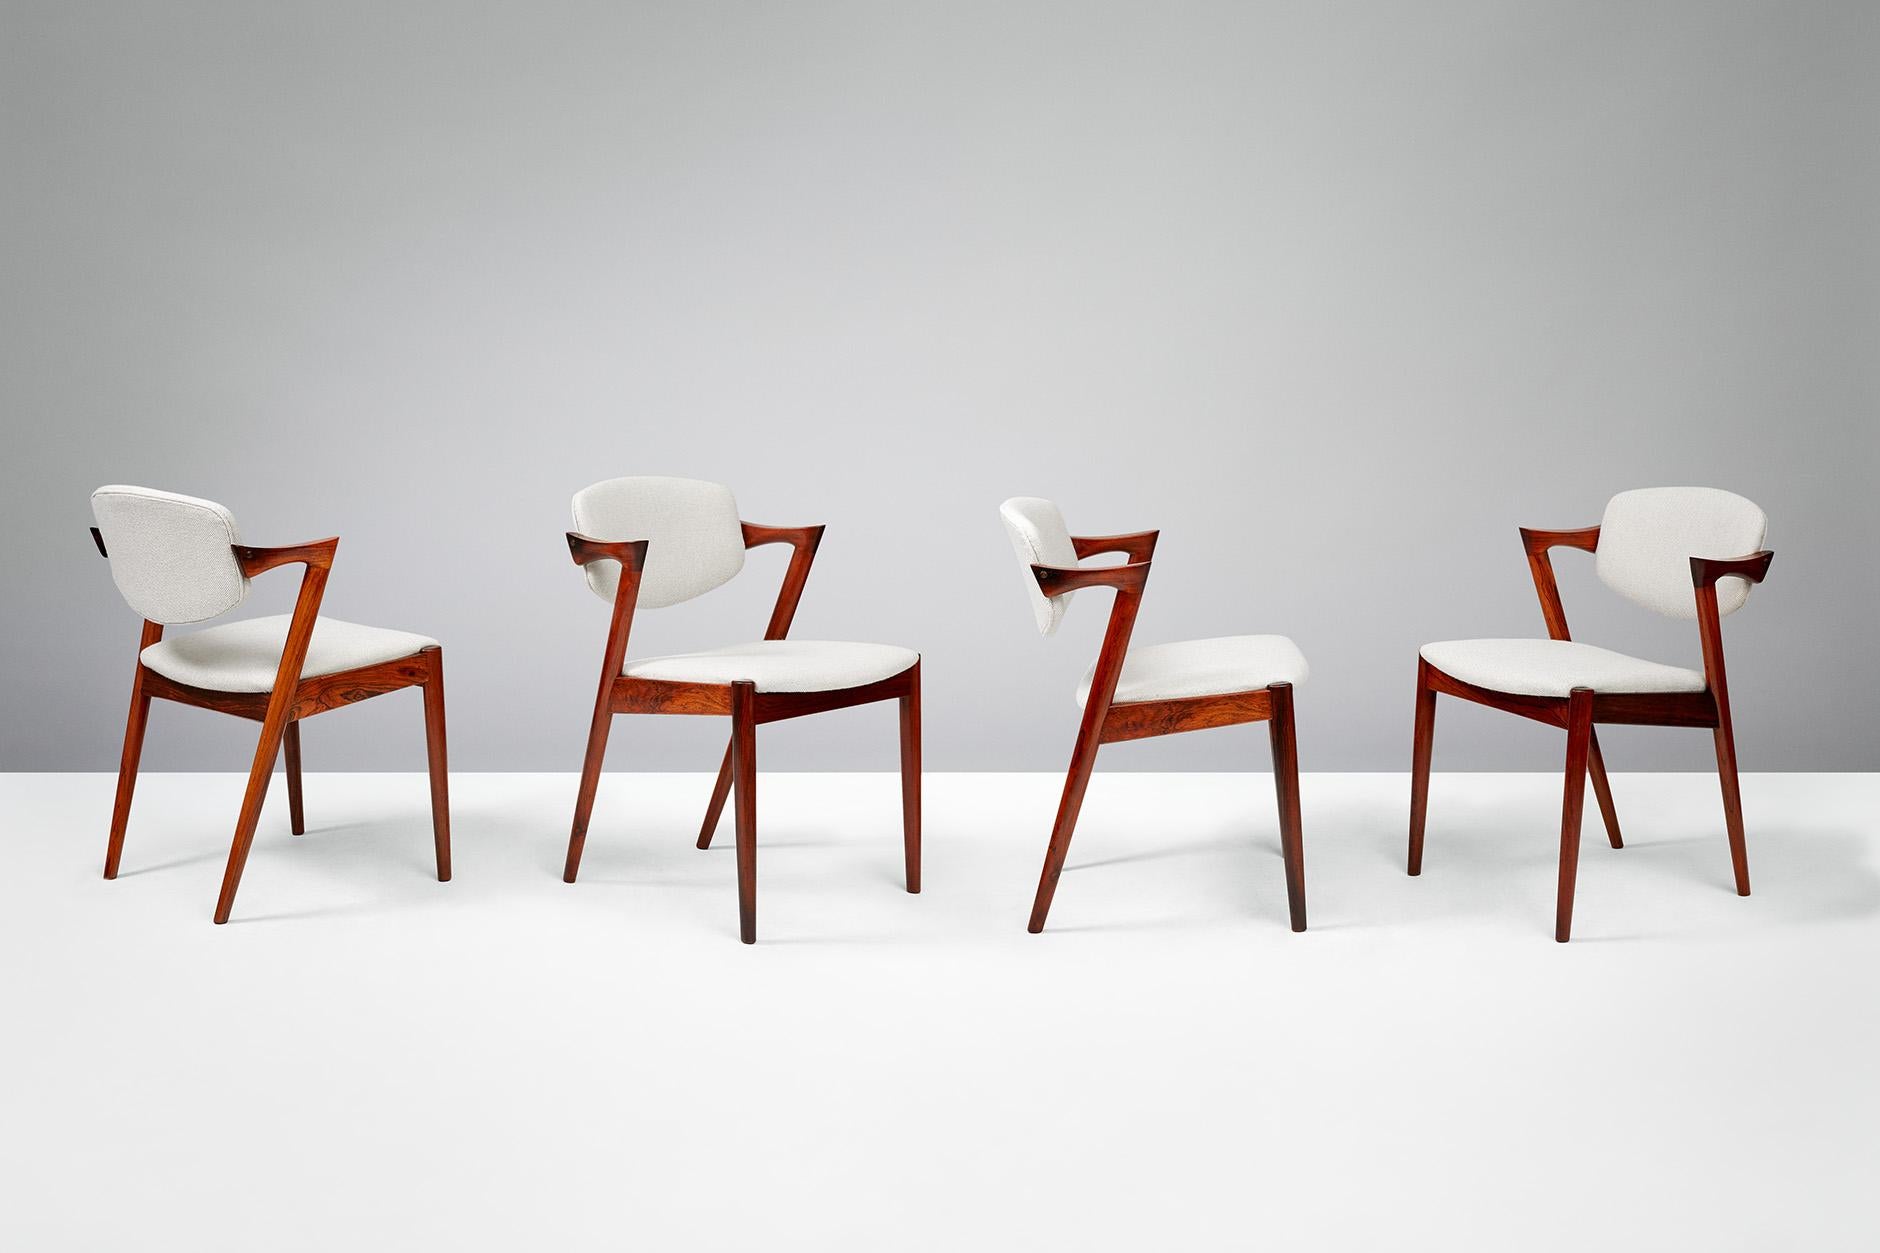 Kai Kristiansen

Model 42 dining chairs, 1956.

Set of 6 dining chairs produced by Skovman Andersen for the Illum Bolighus department store in Copenhagen. Refinished rosewood frames with seat and back reupholstered with Kvadrat Hallingdal wool